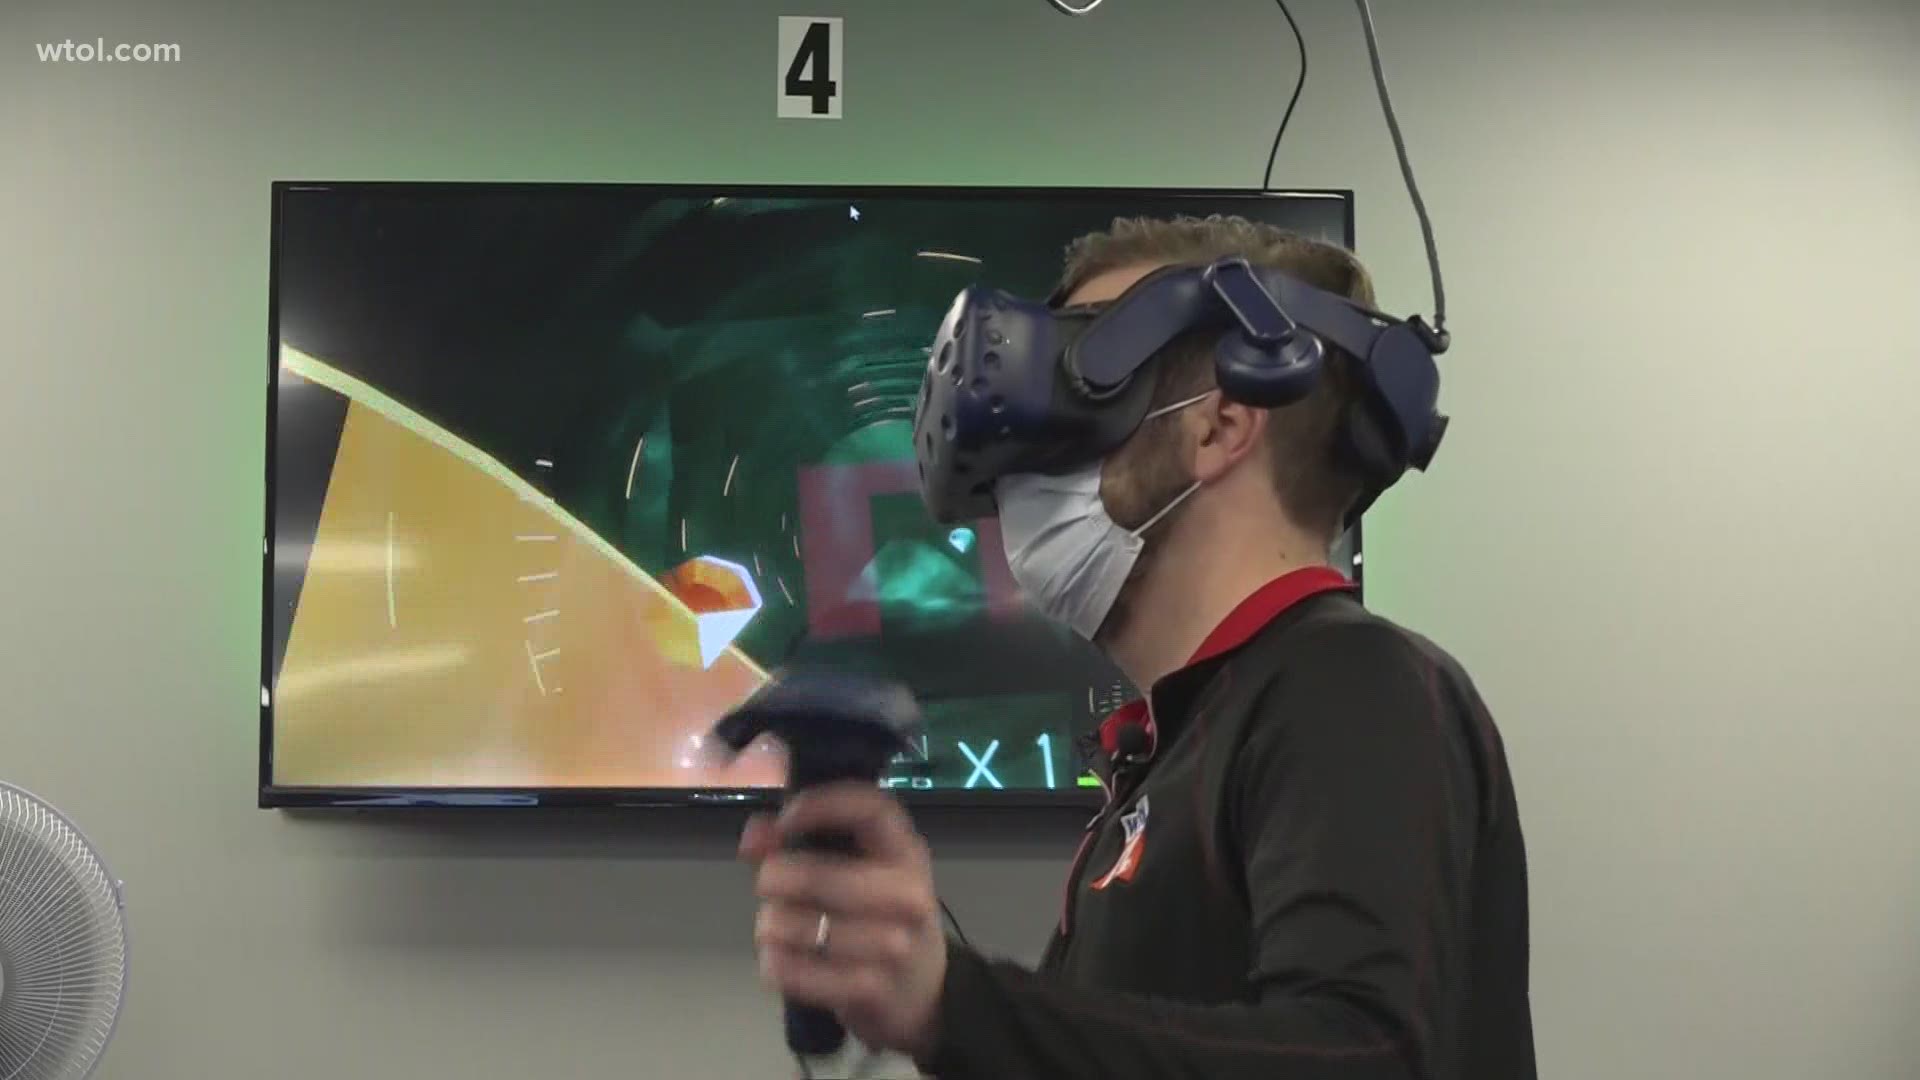 The business hosts 10 VR stations, each with a full library of over 90 video game titles.